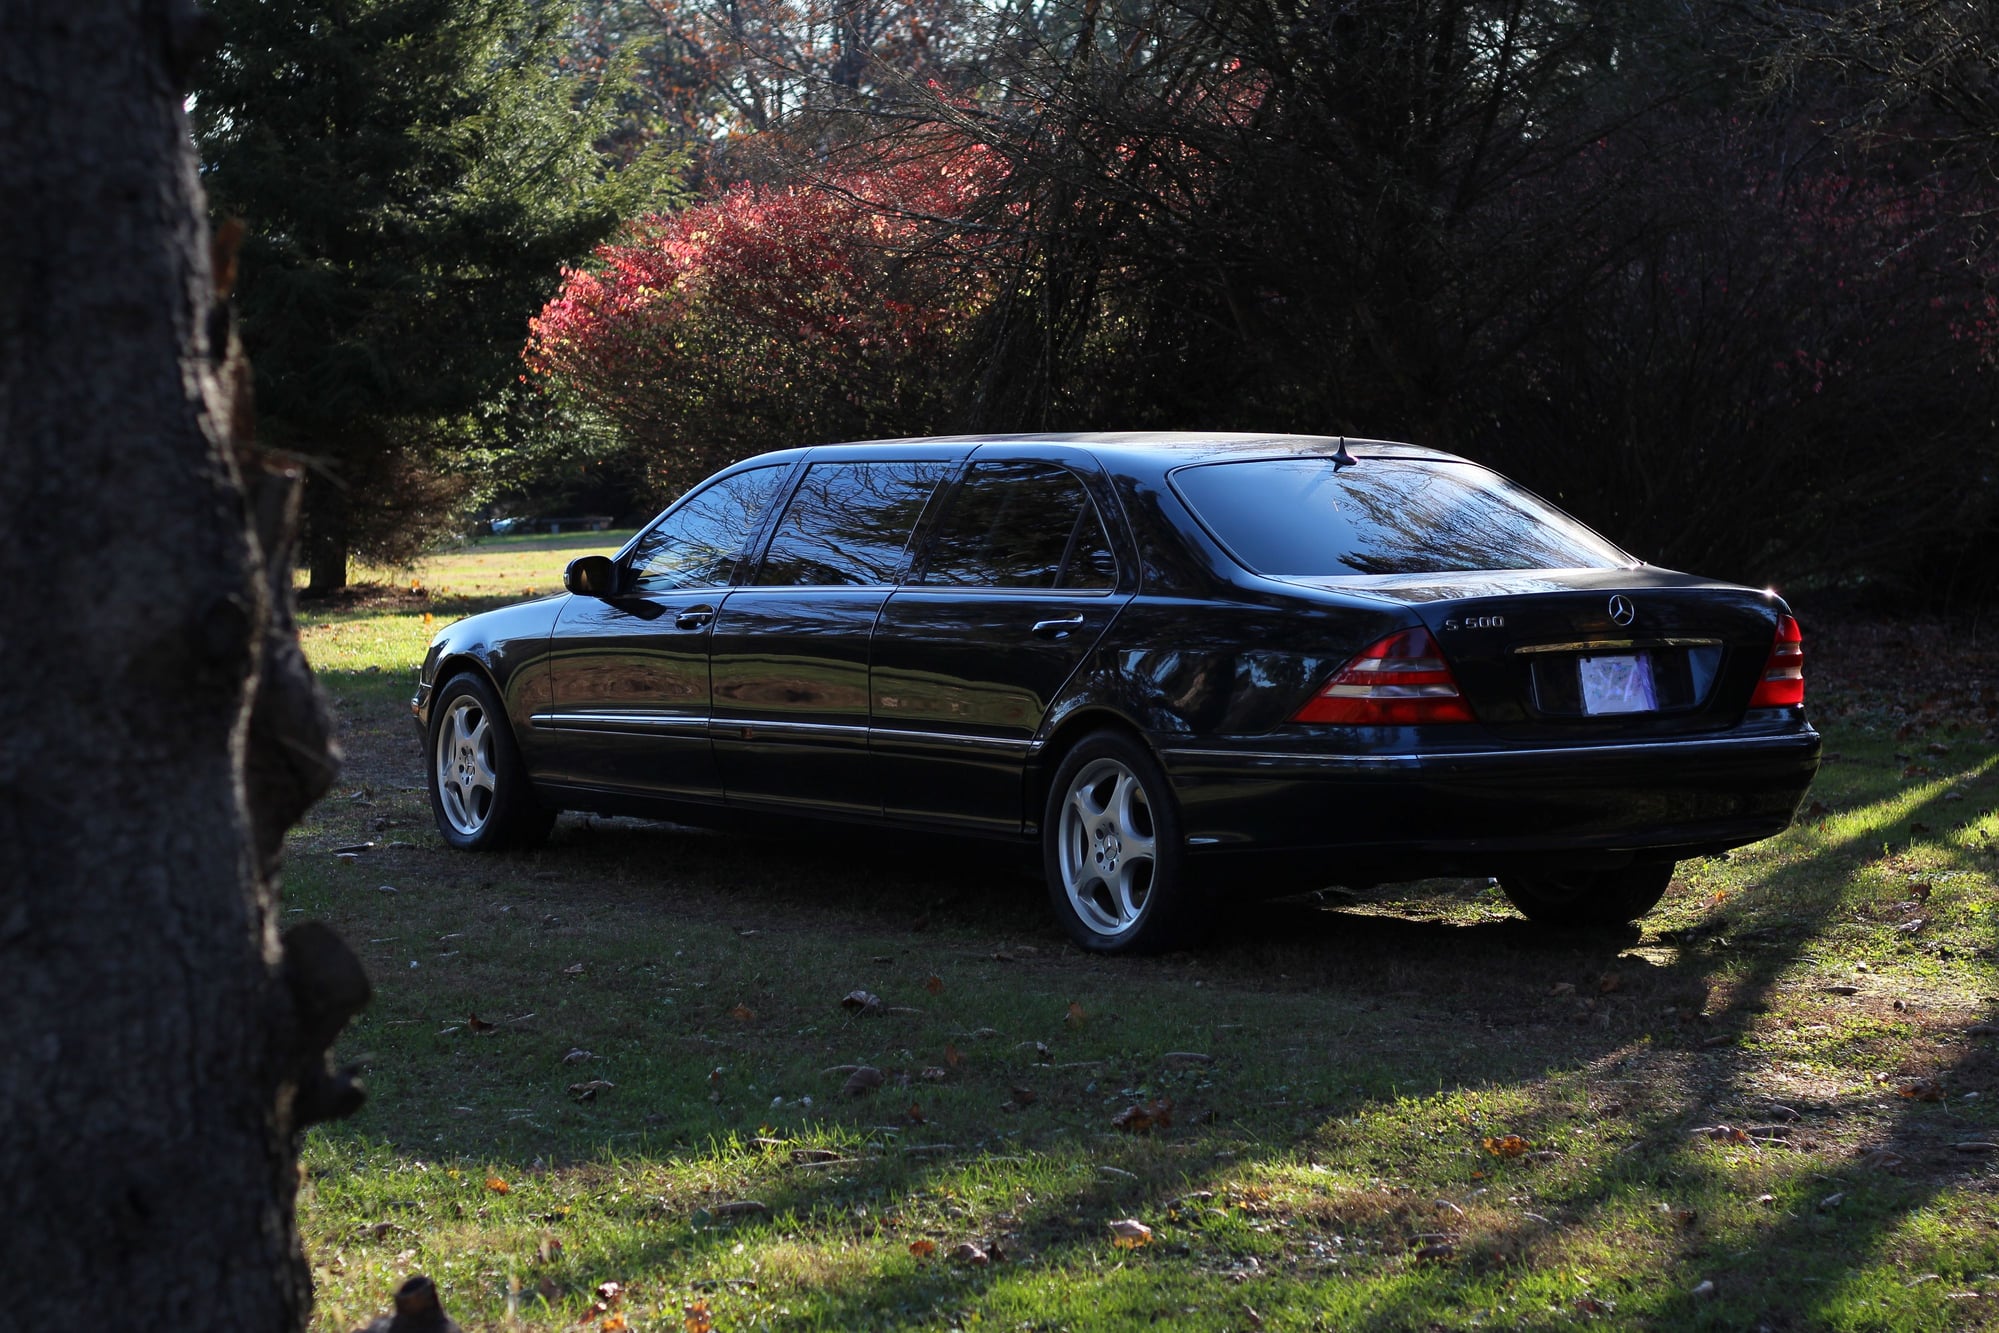 2002 Mercedes-Benz S500 - S500 Pullman 29k Miles - Used - VIN WDB2208751A262842 - 29,500 Miles - 8 cyl - 2WD - Automatic - Sedan - Blue - Danbury, CT 06810, United States